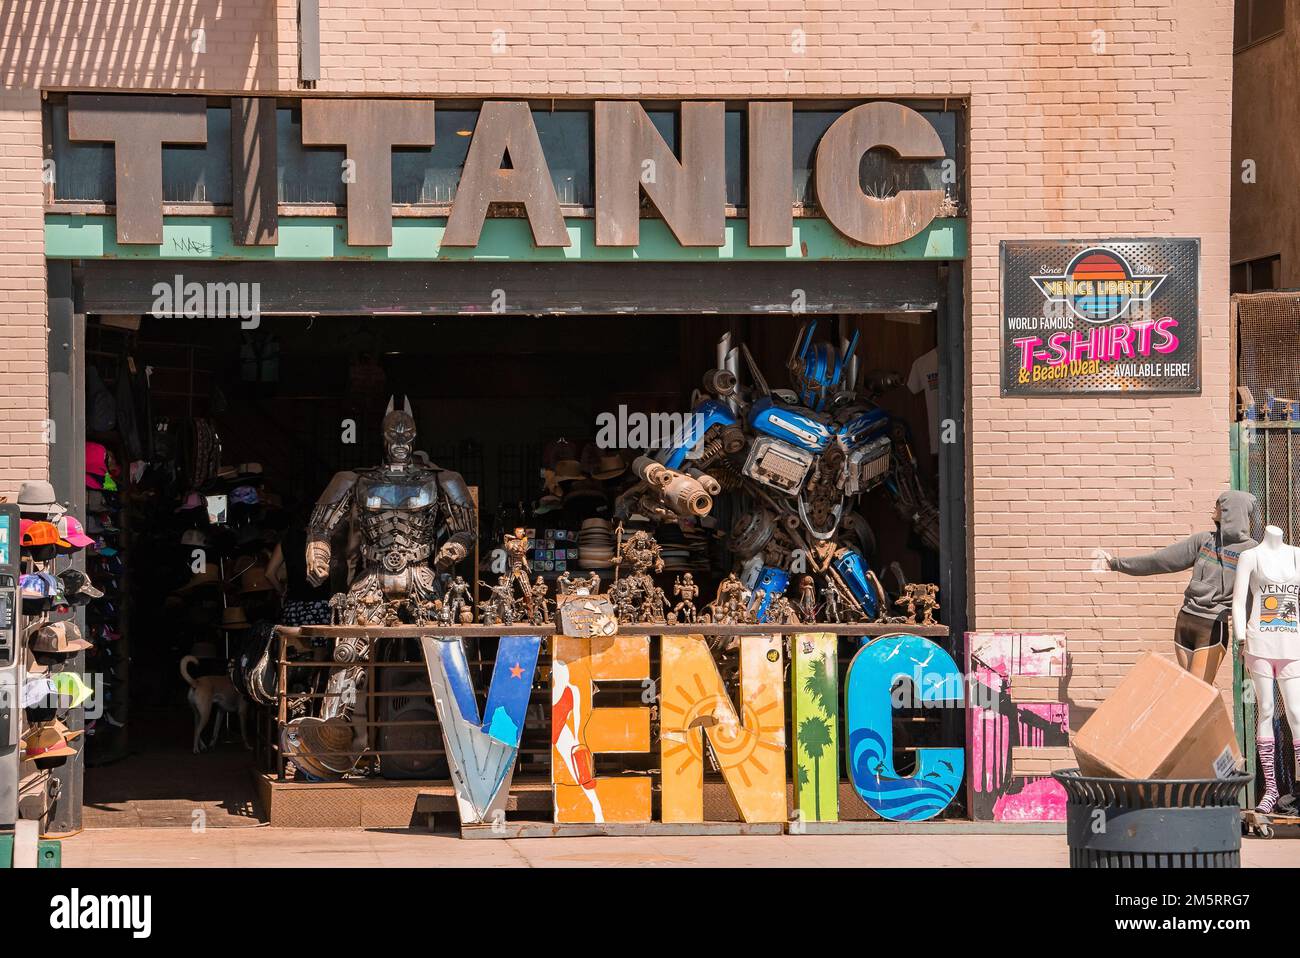 Marvel's superheroes metallic statues displayed for sale at Titanic Venice shop Stock Photo